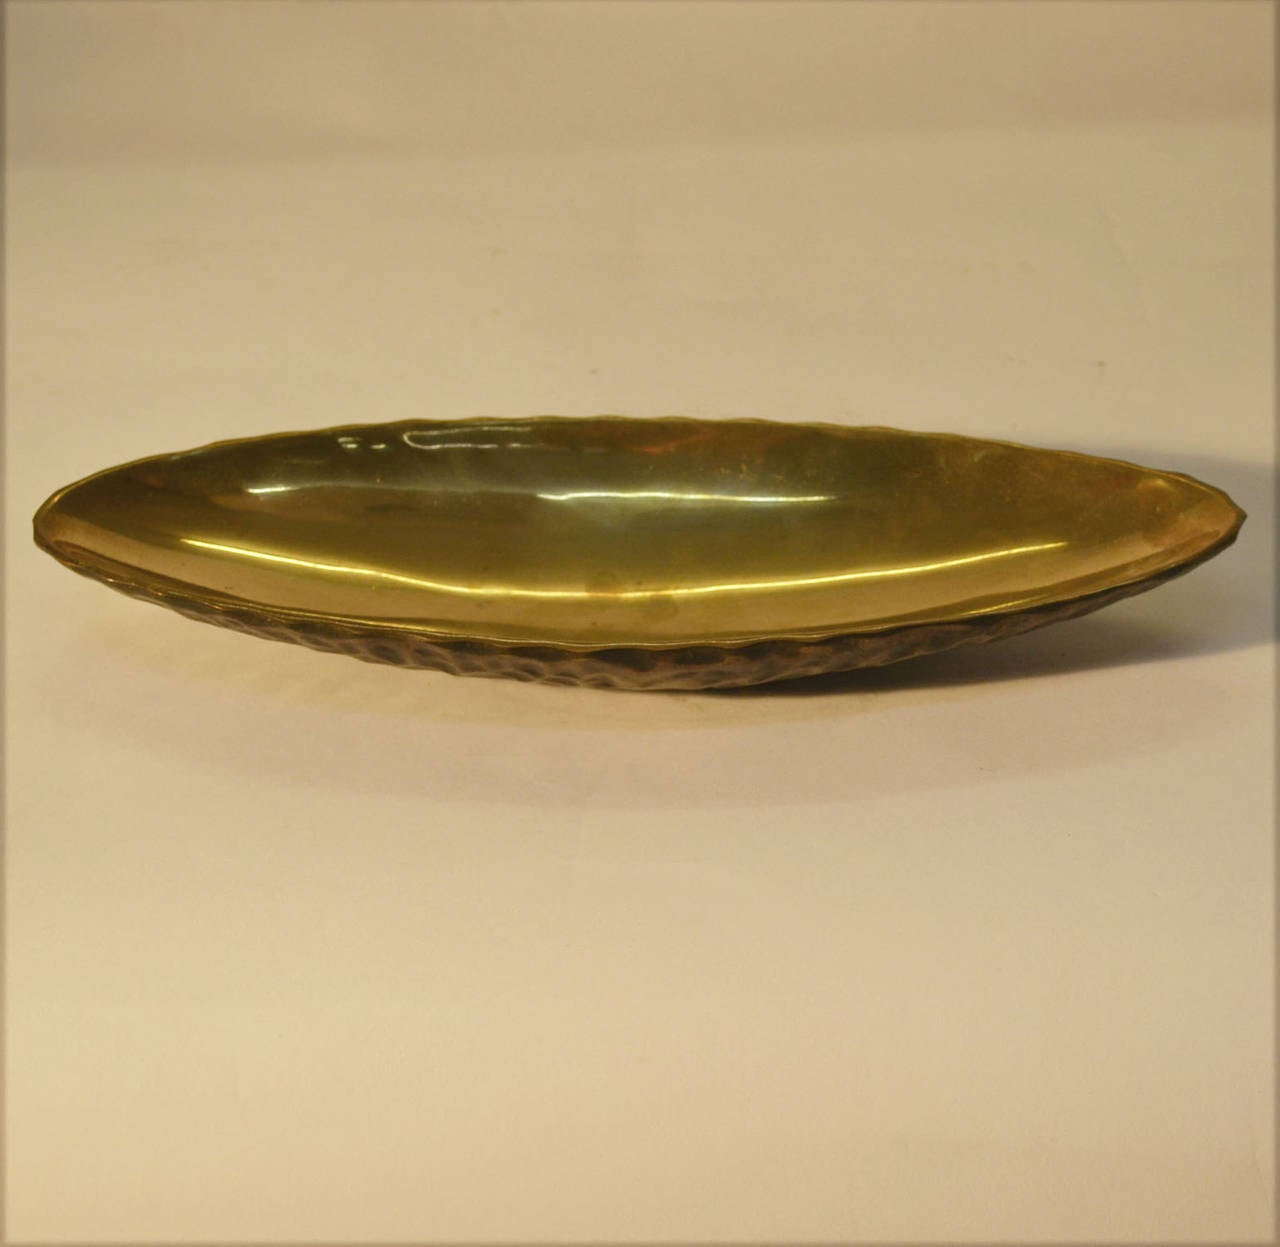 Bronze cast oval dish signed Svensk by the Danish jeweler WB with a textural patinated finish on the outside. 
Signed; Svensk WB